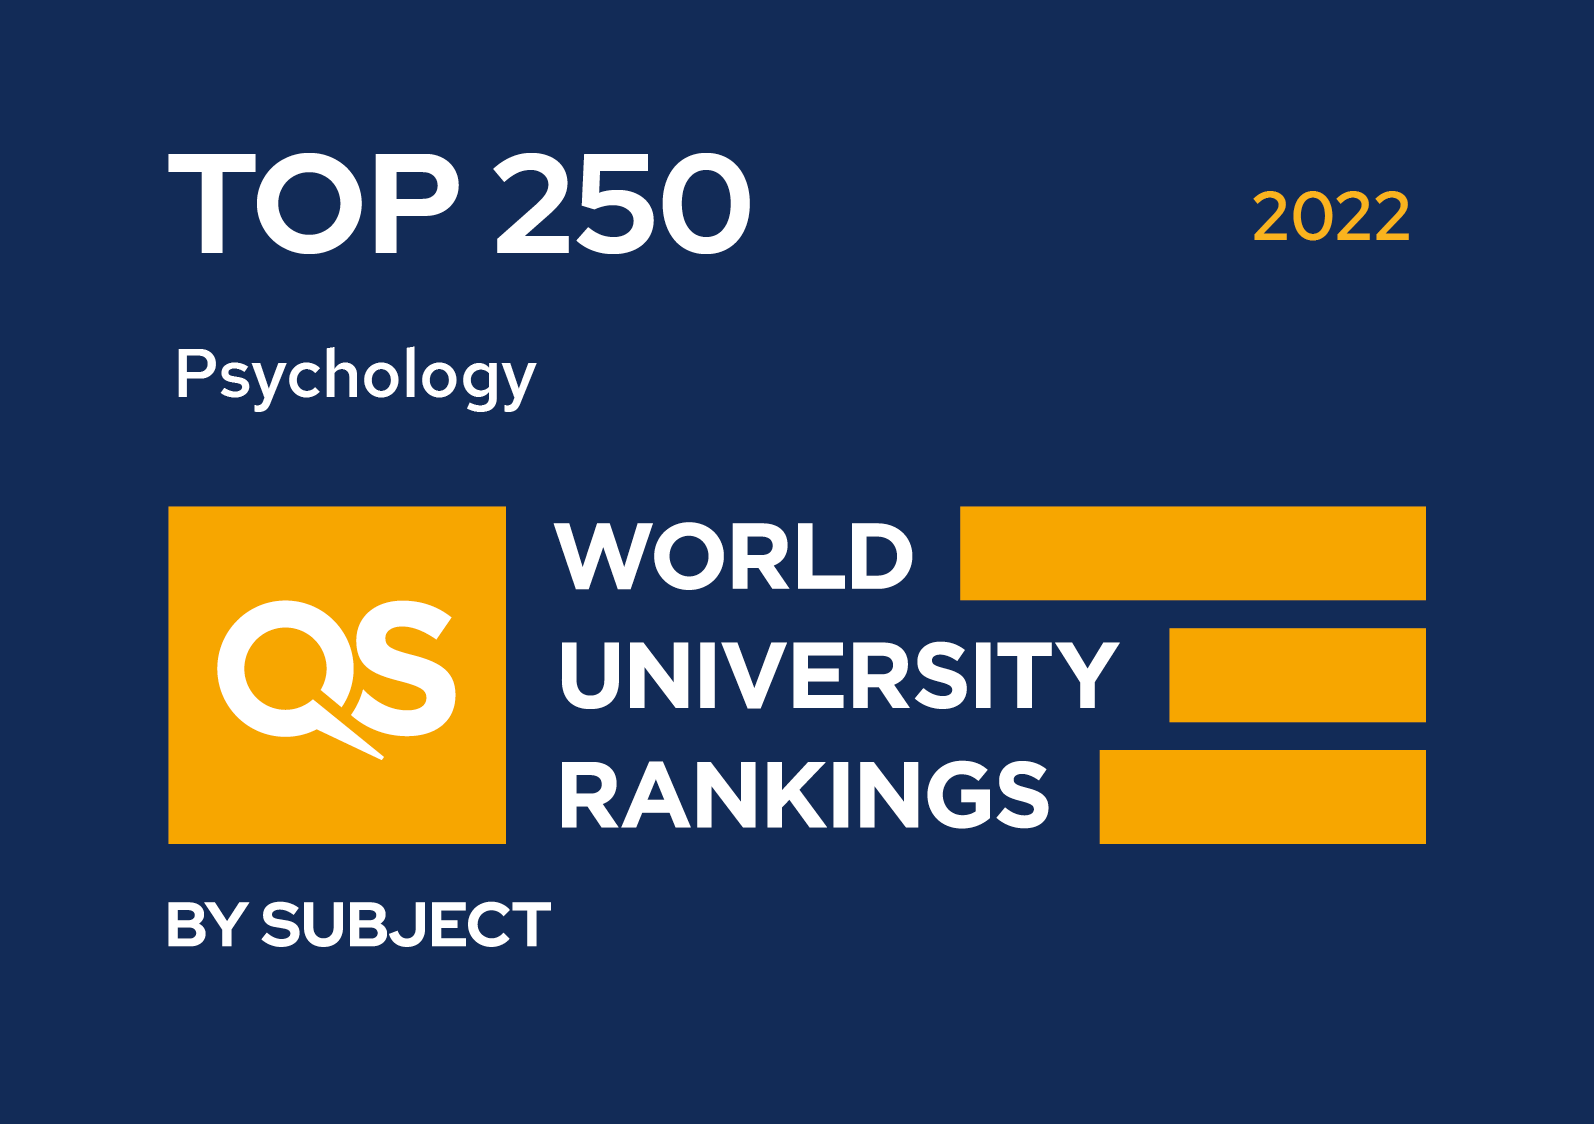 Western Sydney University has been ranked in the Top 250 Universities for Psychology